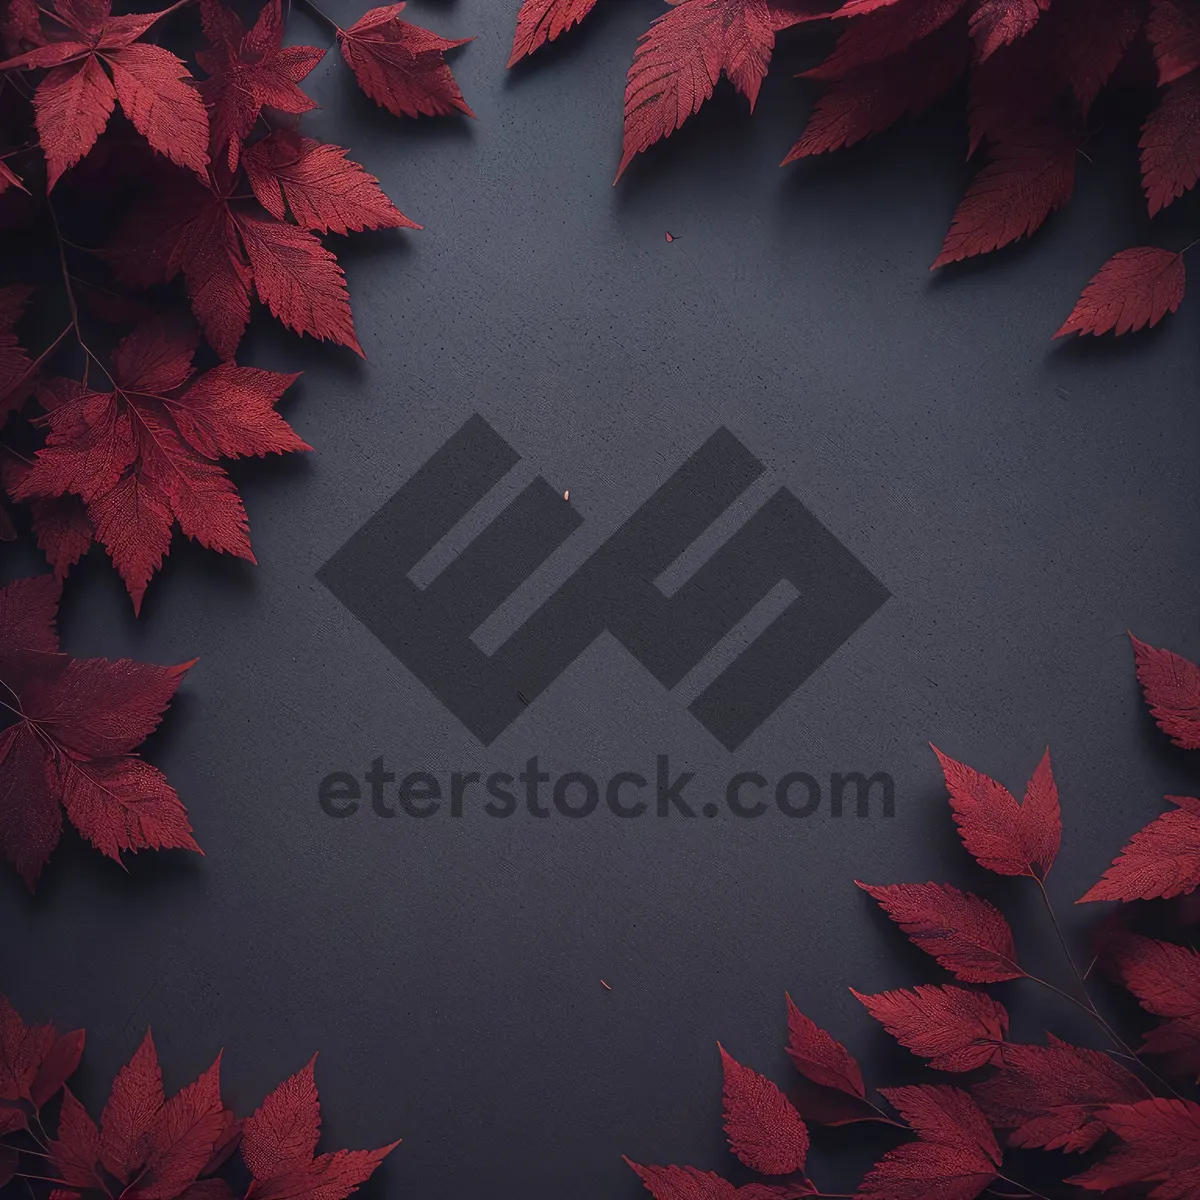 Picture of Vibrant Autumn Foliage in a Colorful Forest